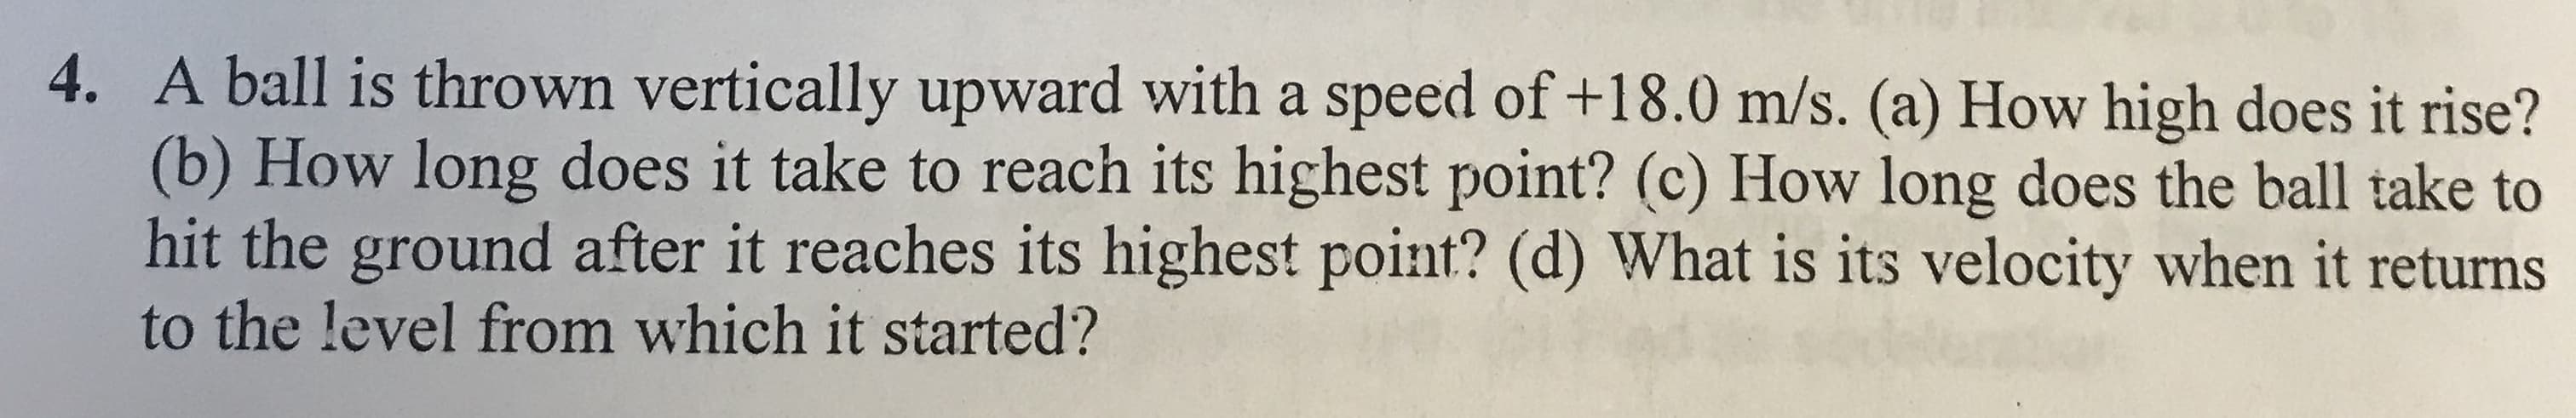 A ball is thrown vertically upward with a speed of +18.0 m/s. (a) How high does it rise?
(b) How long does it take to reach its highest point? (c) How long does the ball take to
hit the ground after it reaches its highest point? (d) What is its velocity when it returns
to the level from which it started?
4.
